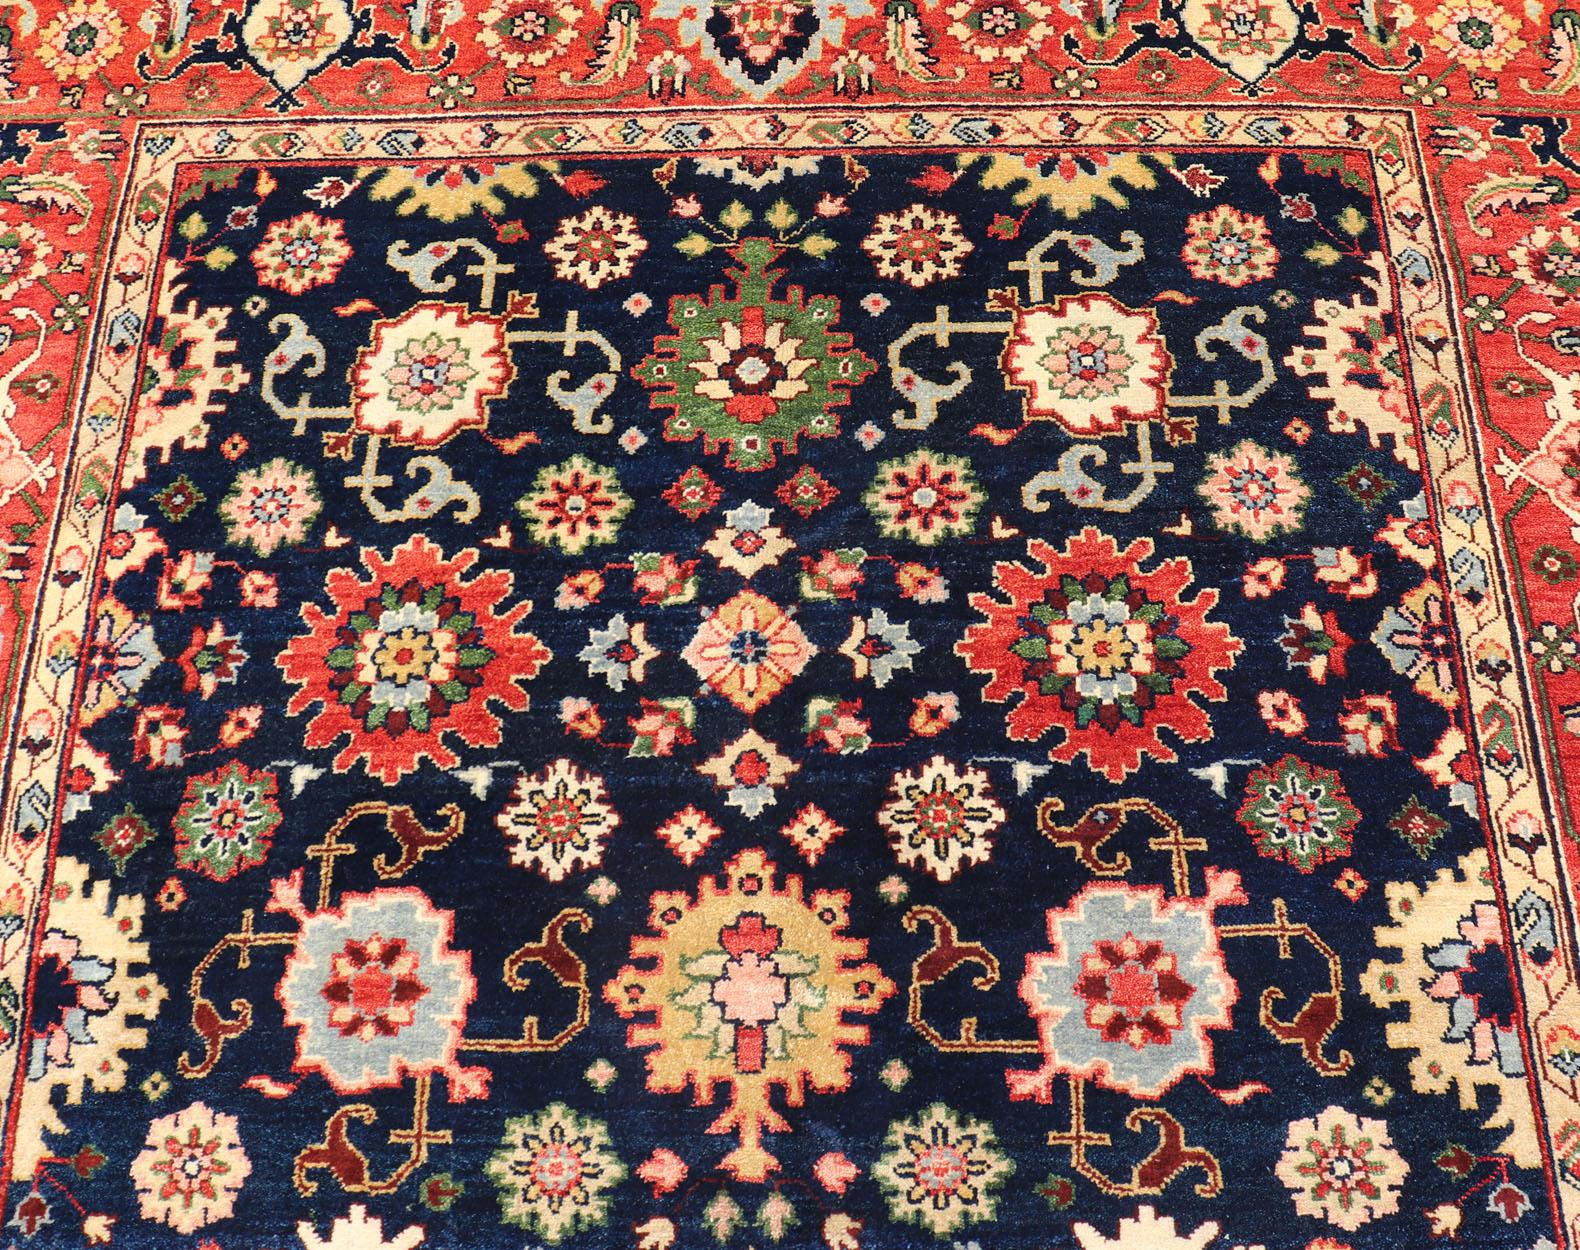 Keivan Woven Arts Sultanabad-Mahal Design in All-Over Floral Handgeknüpfter Teppich im Angebot 2